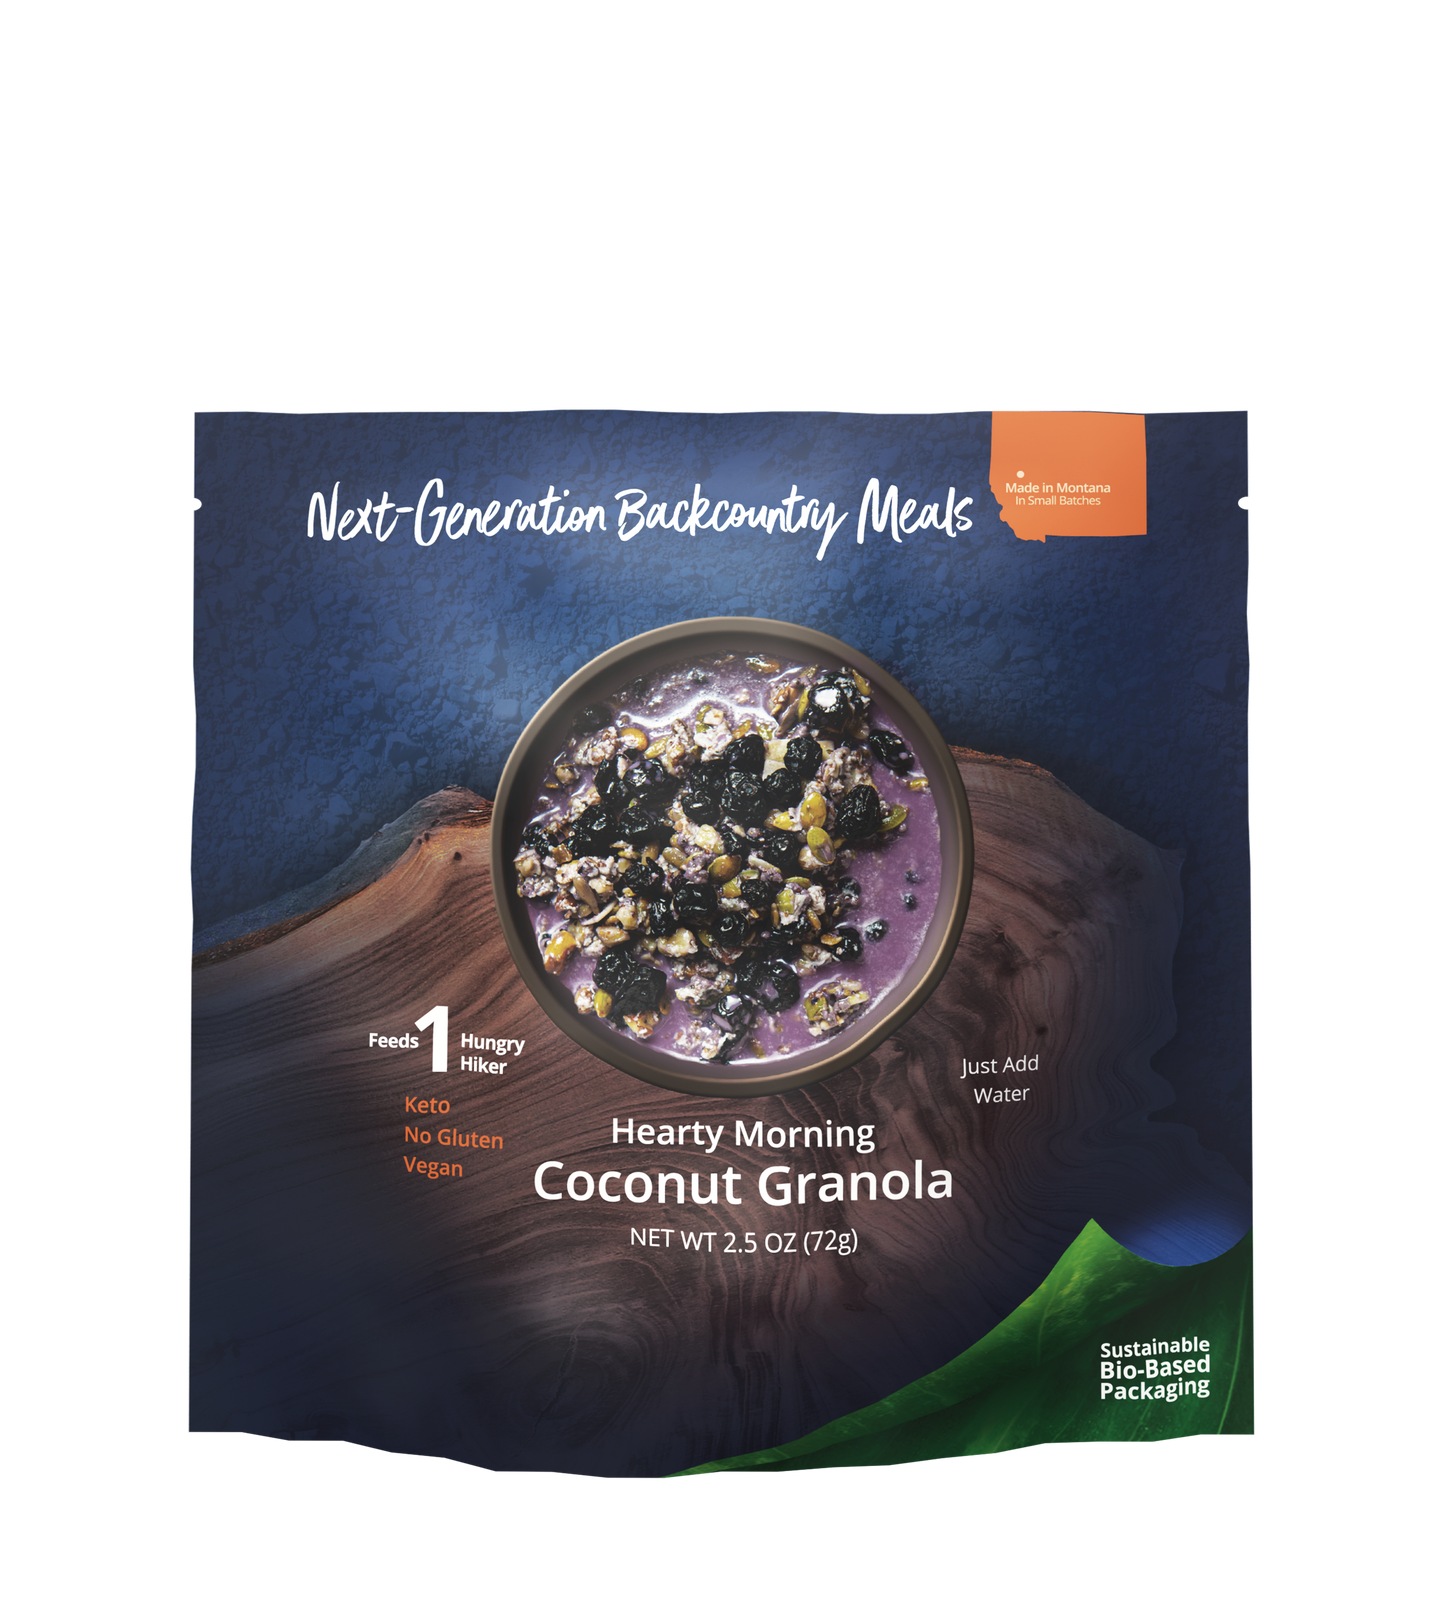 RightOnTrek hearty morning coconut granola that feeds 1 person